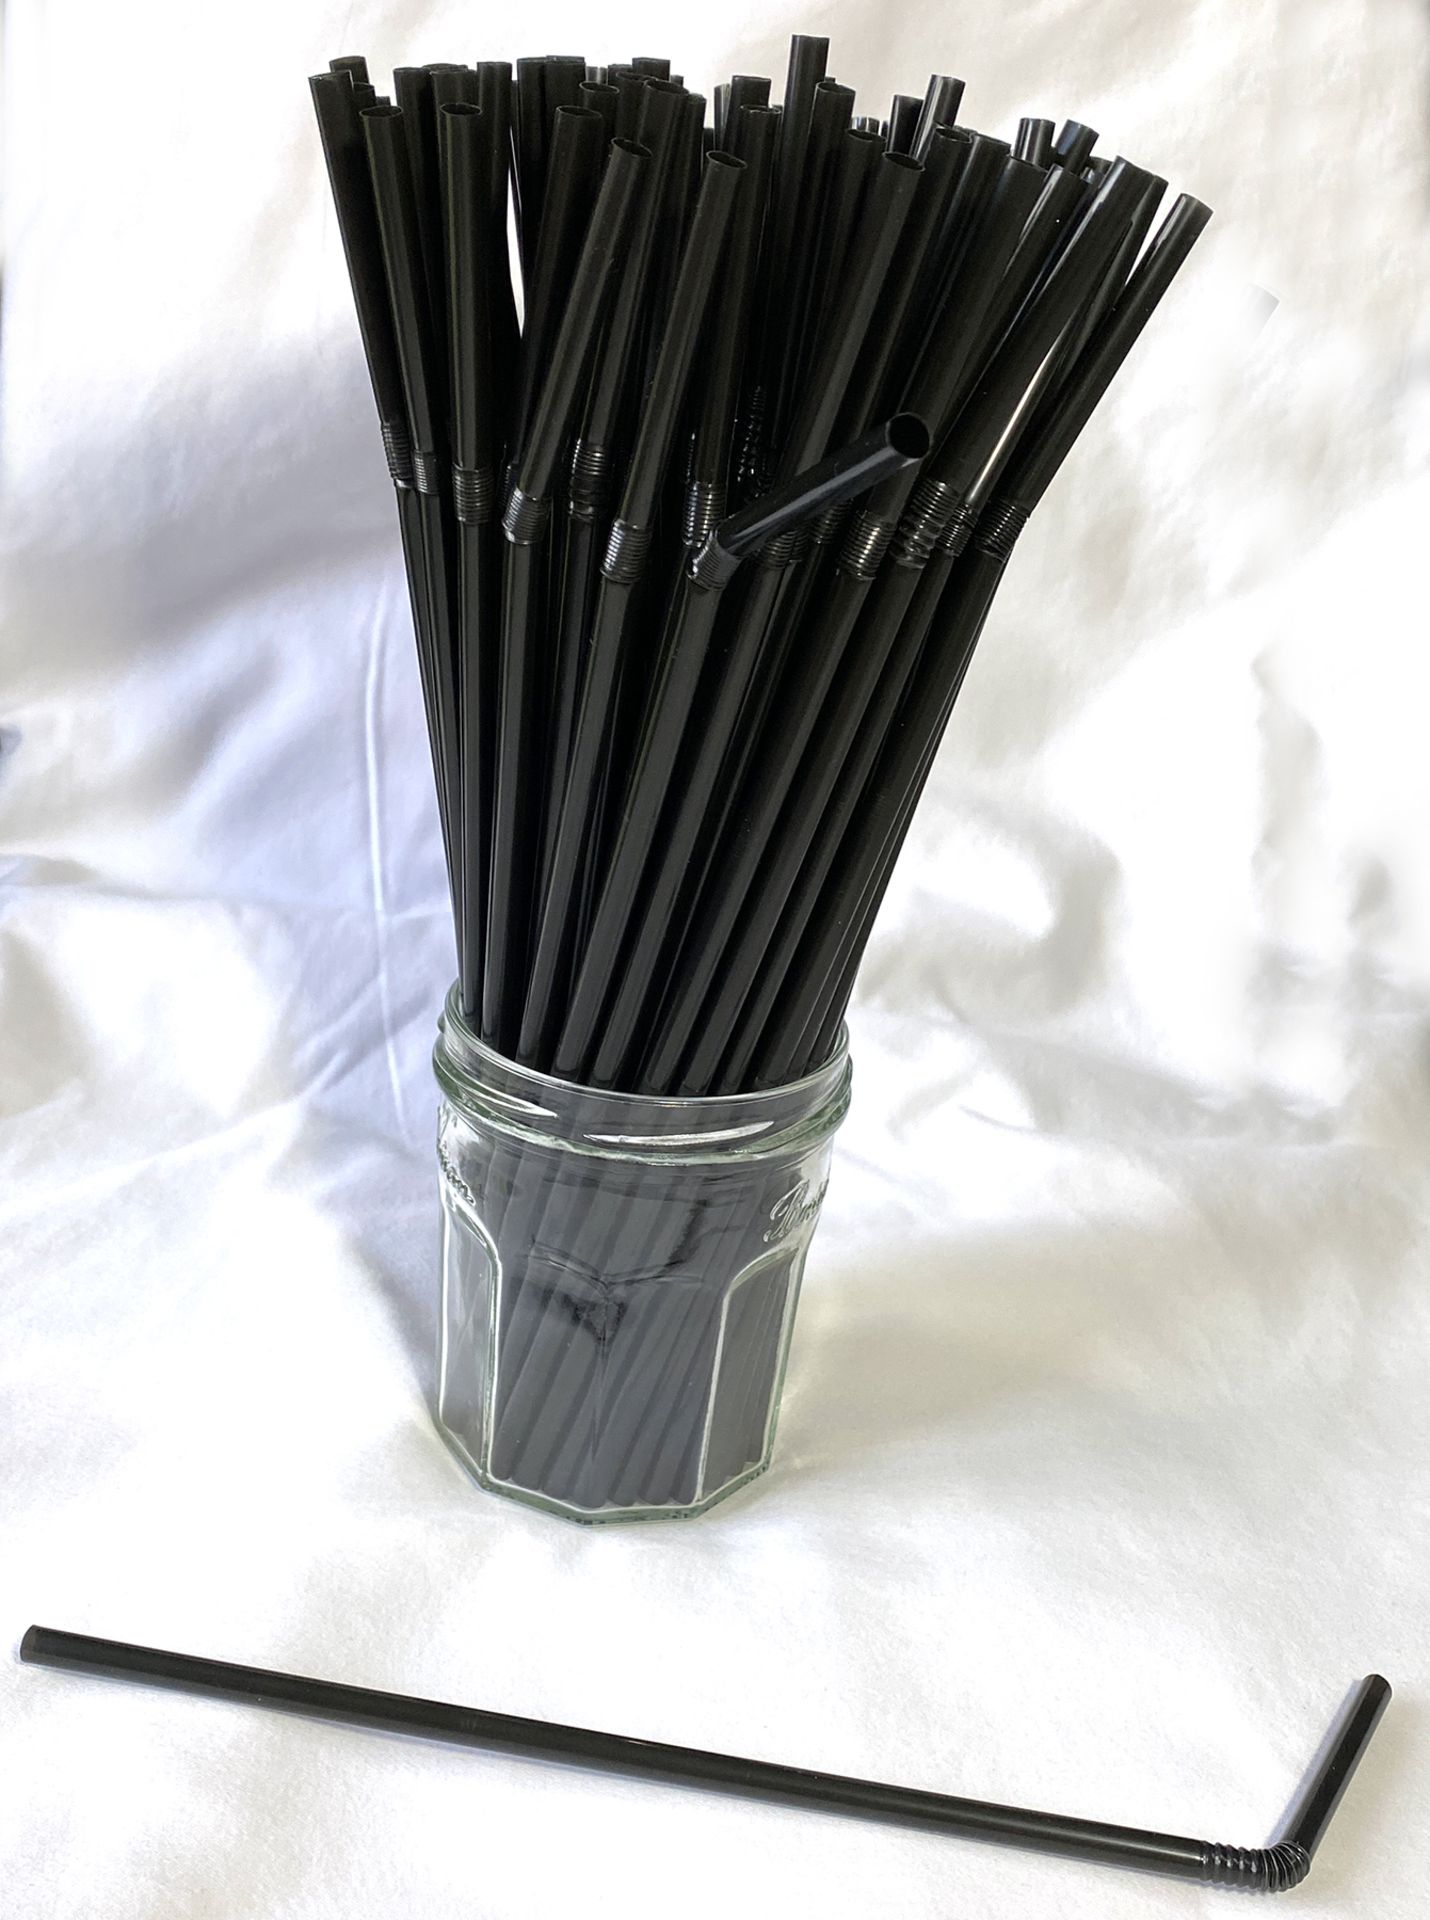 5 x Boxes of Flexible Bottle Straws by 888 Gastro Disposables